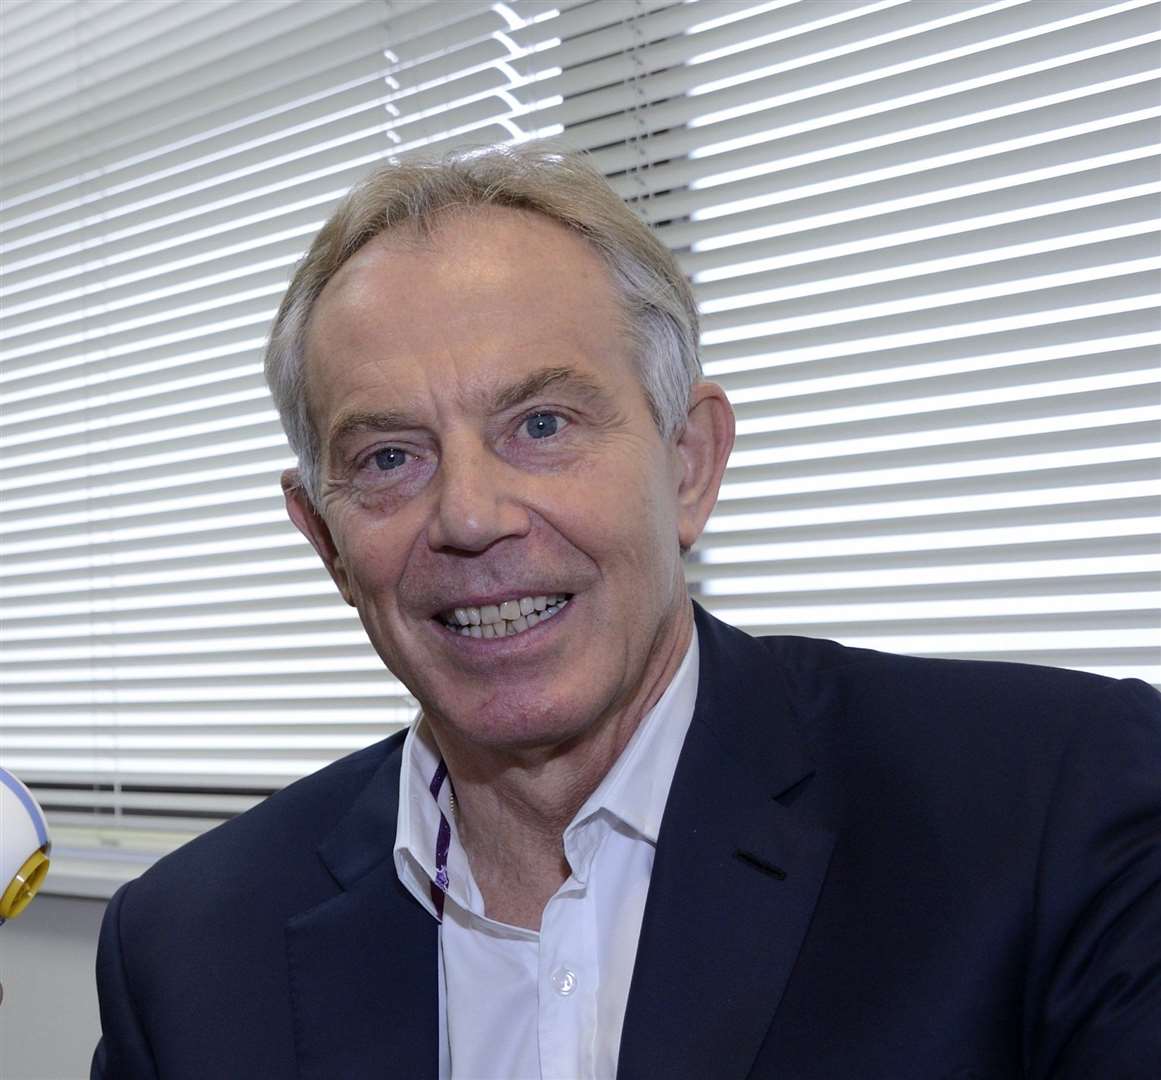 Former Prime Minister Tony Blair believes GCSEs and A Levels should be scrapped.